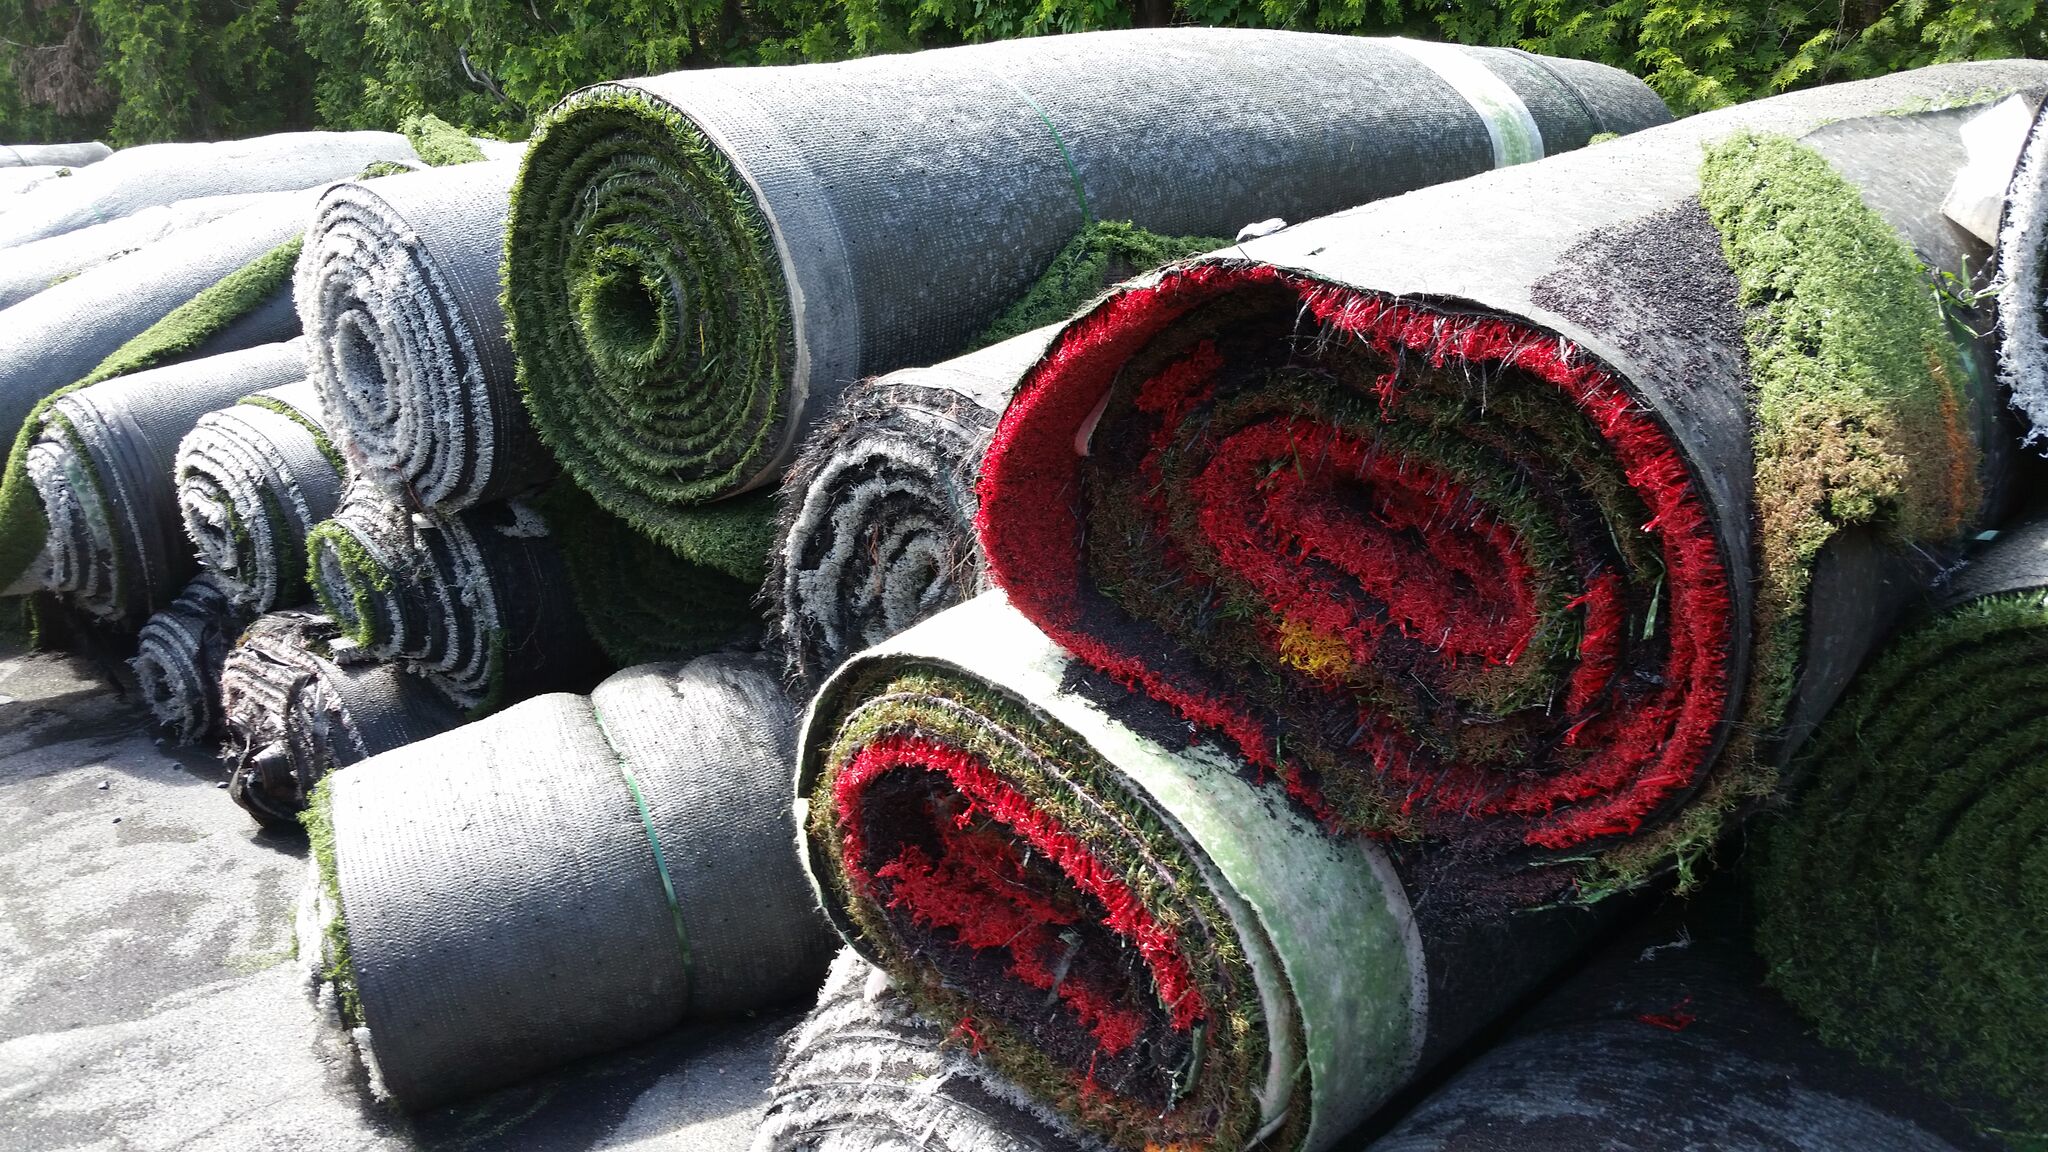 The Amazing Value of Recycled Artificial Grass